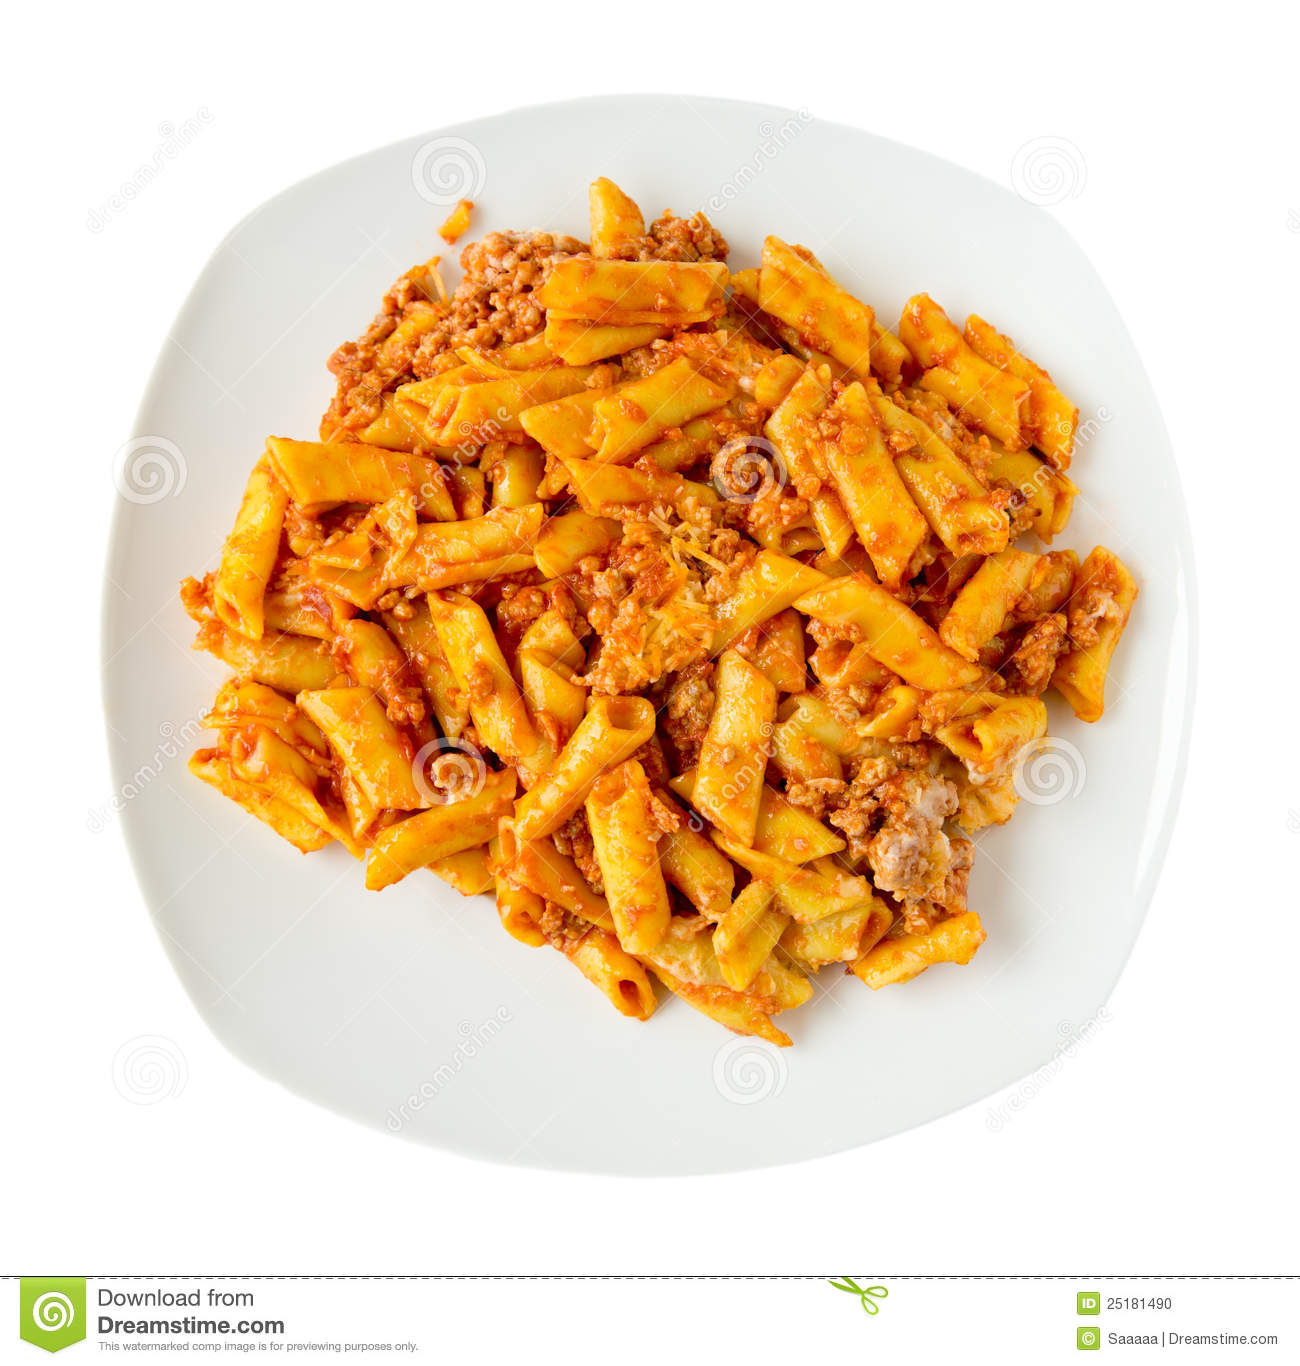 Plate Of Macaroni With Ground Beef And Cheese On White Background 